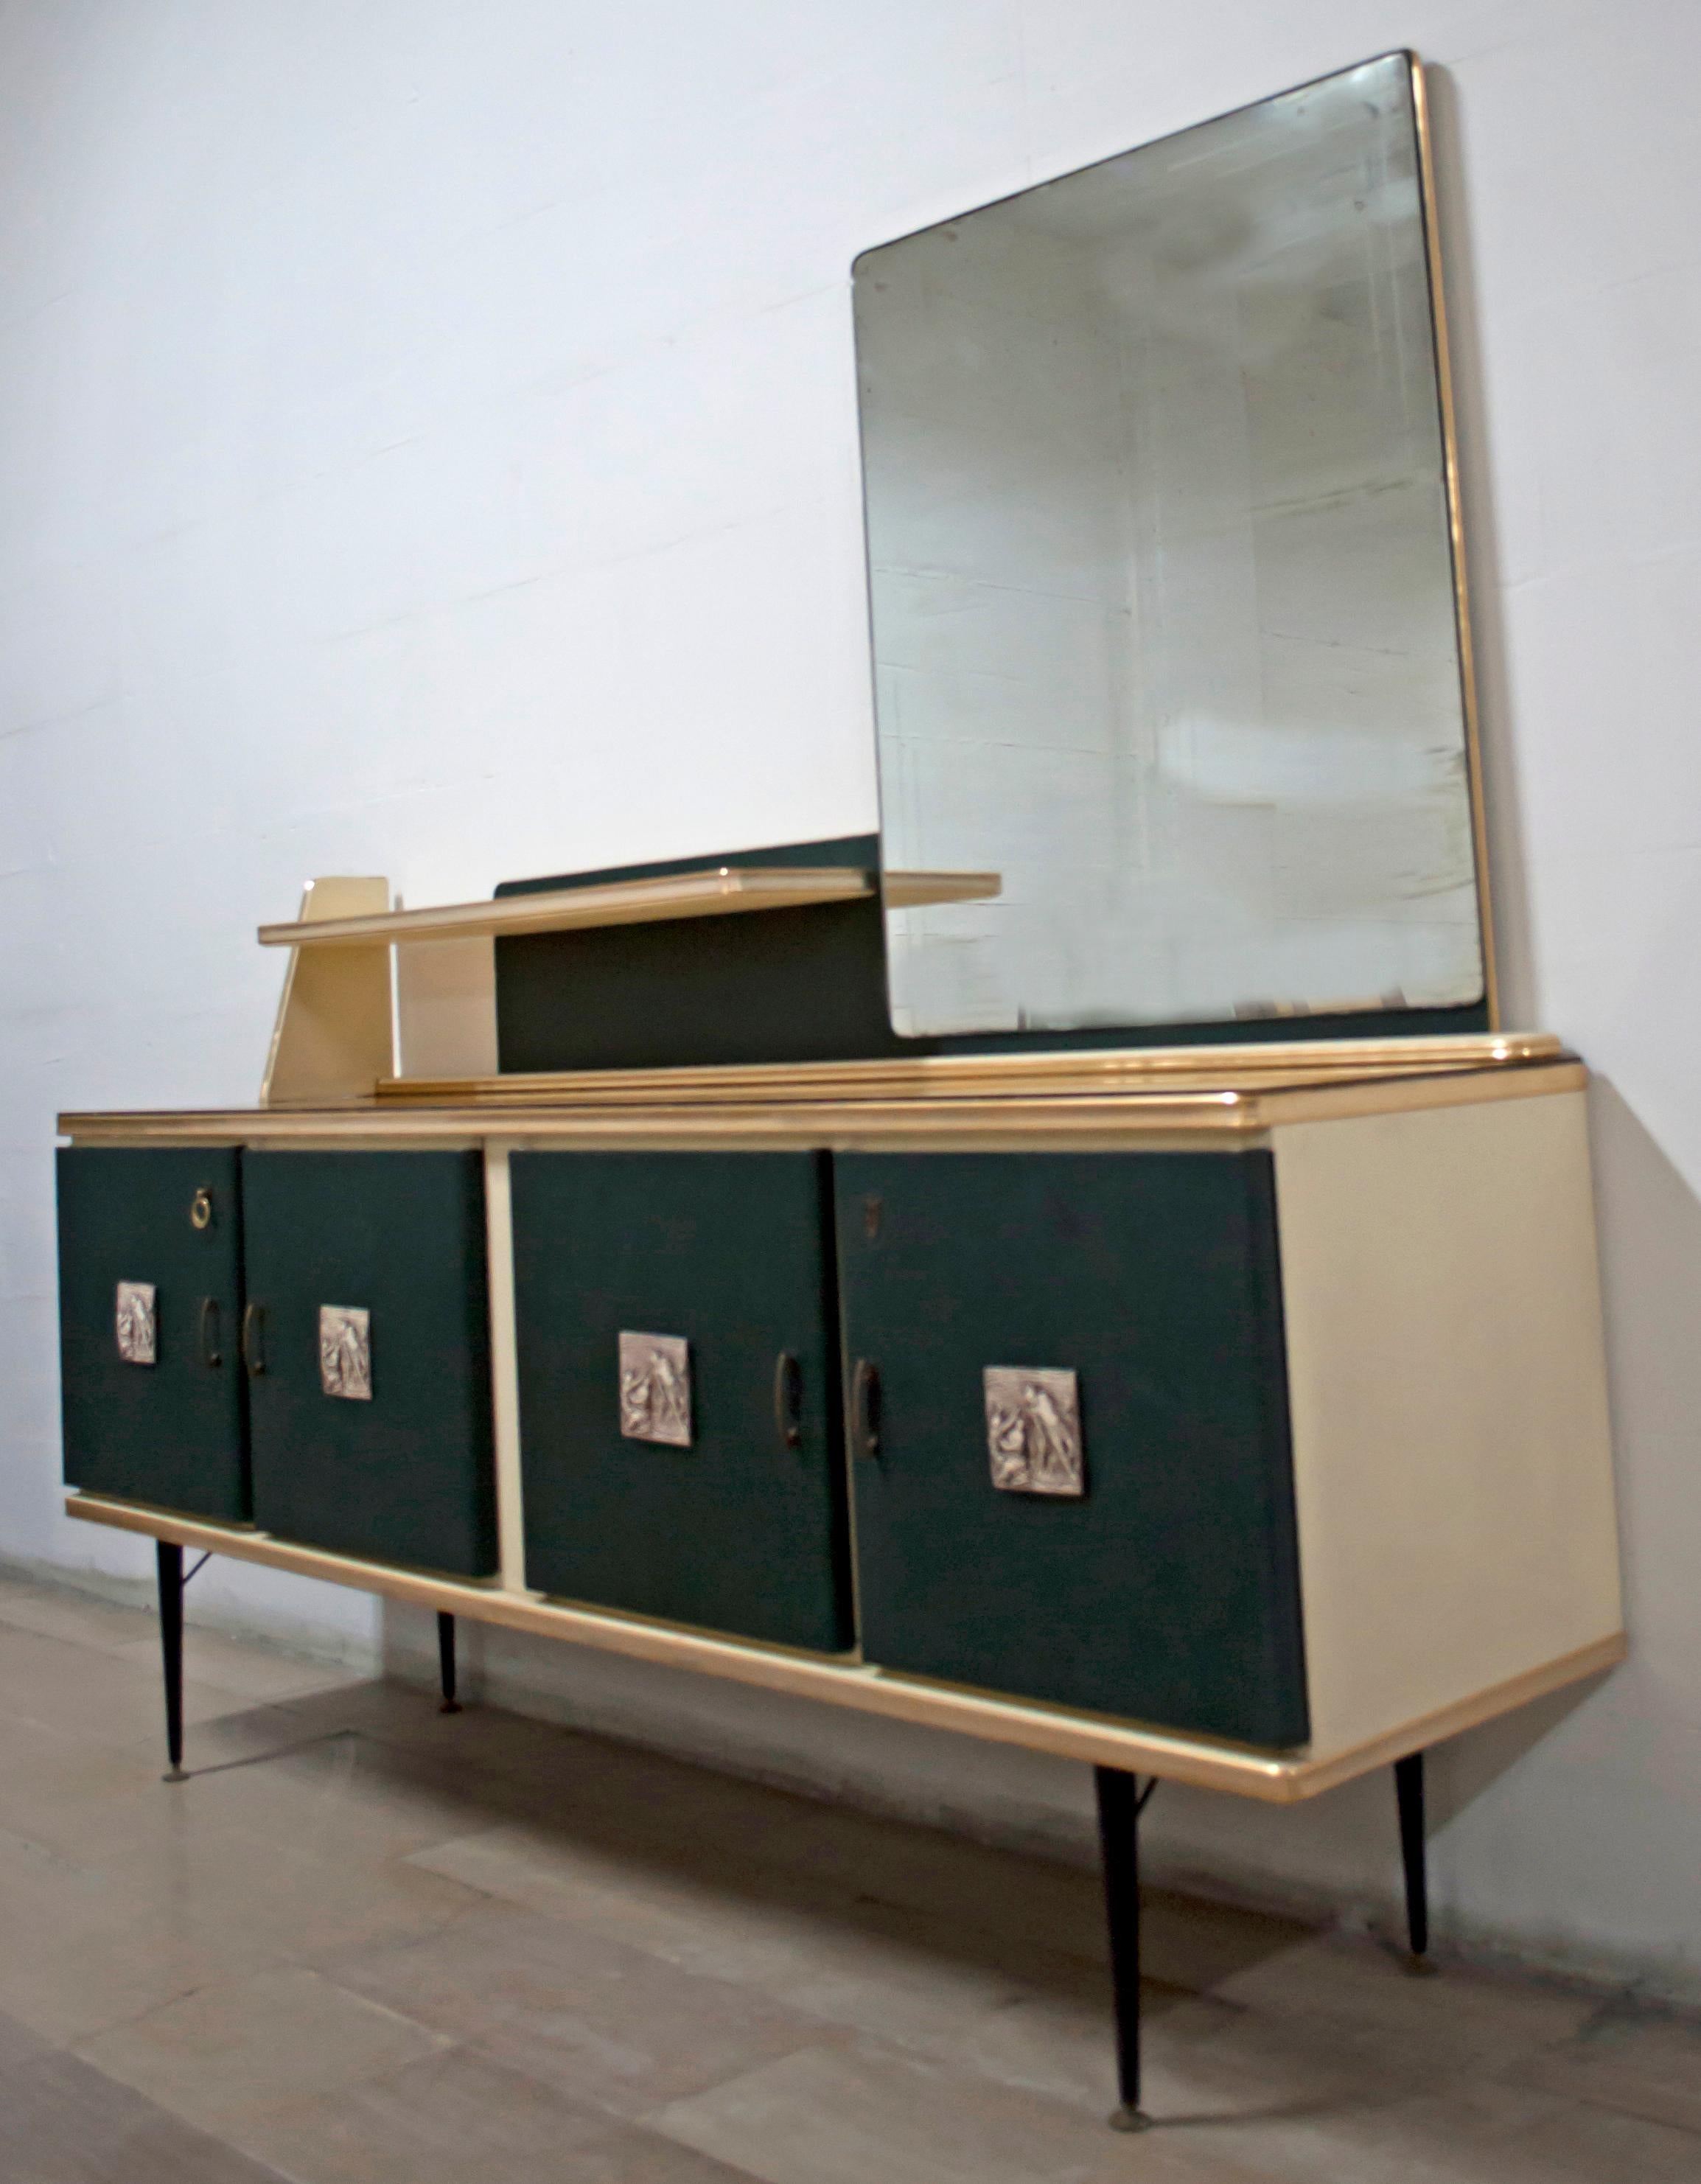 Four-door sideboard from the 1950s, made with green vinyl doors, inspired by the production of Umberto Mascagni. The main body structure is made of European wood. This piece features a cream vinyl with anodized aluminum, both outside and inside. The